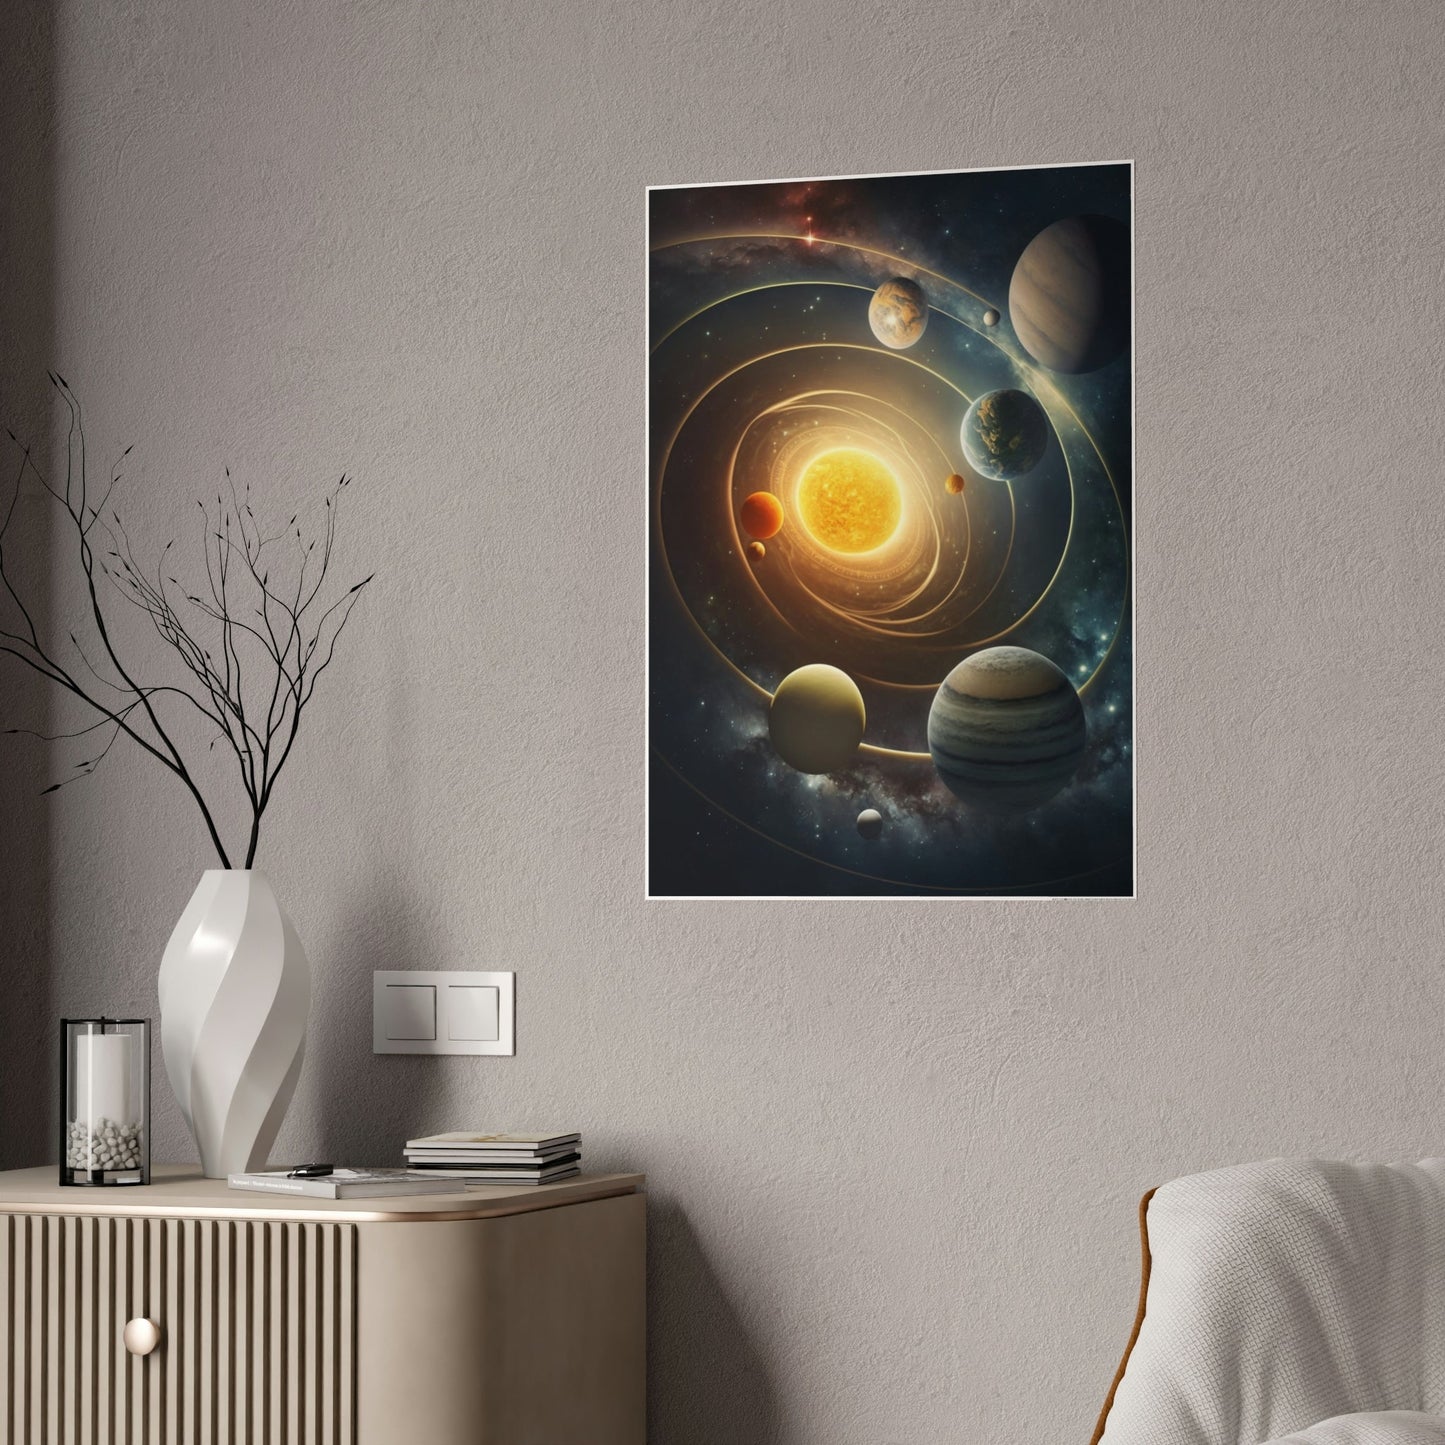 Discover the Cosmos: Framed Canvas Art of the Solar System for an Out-of-This-World Experience